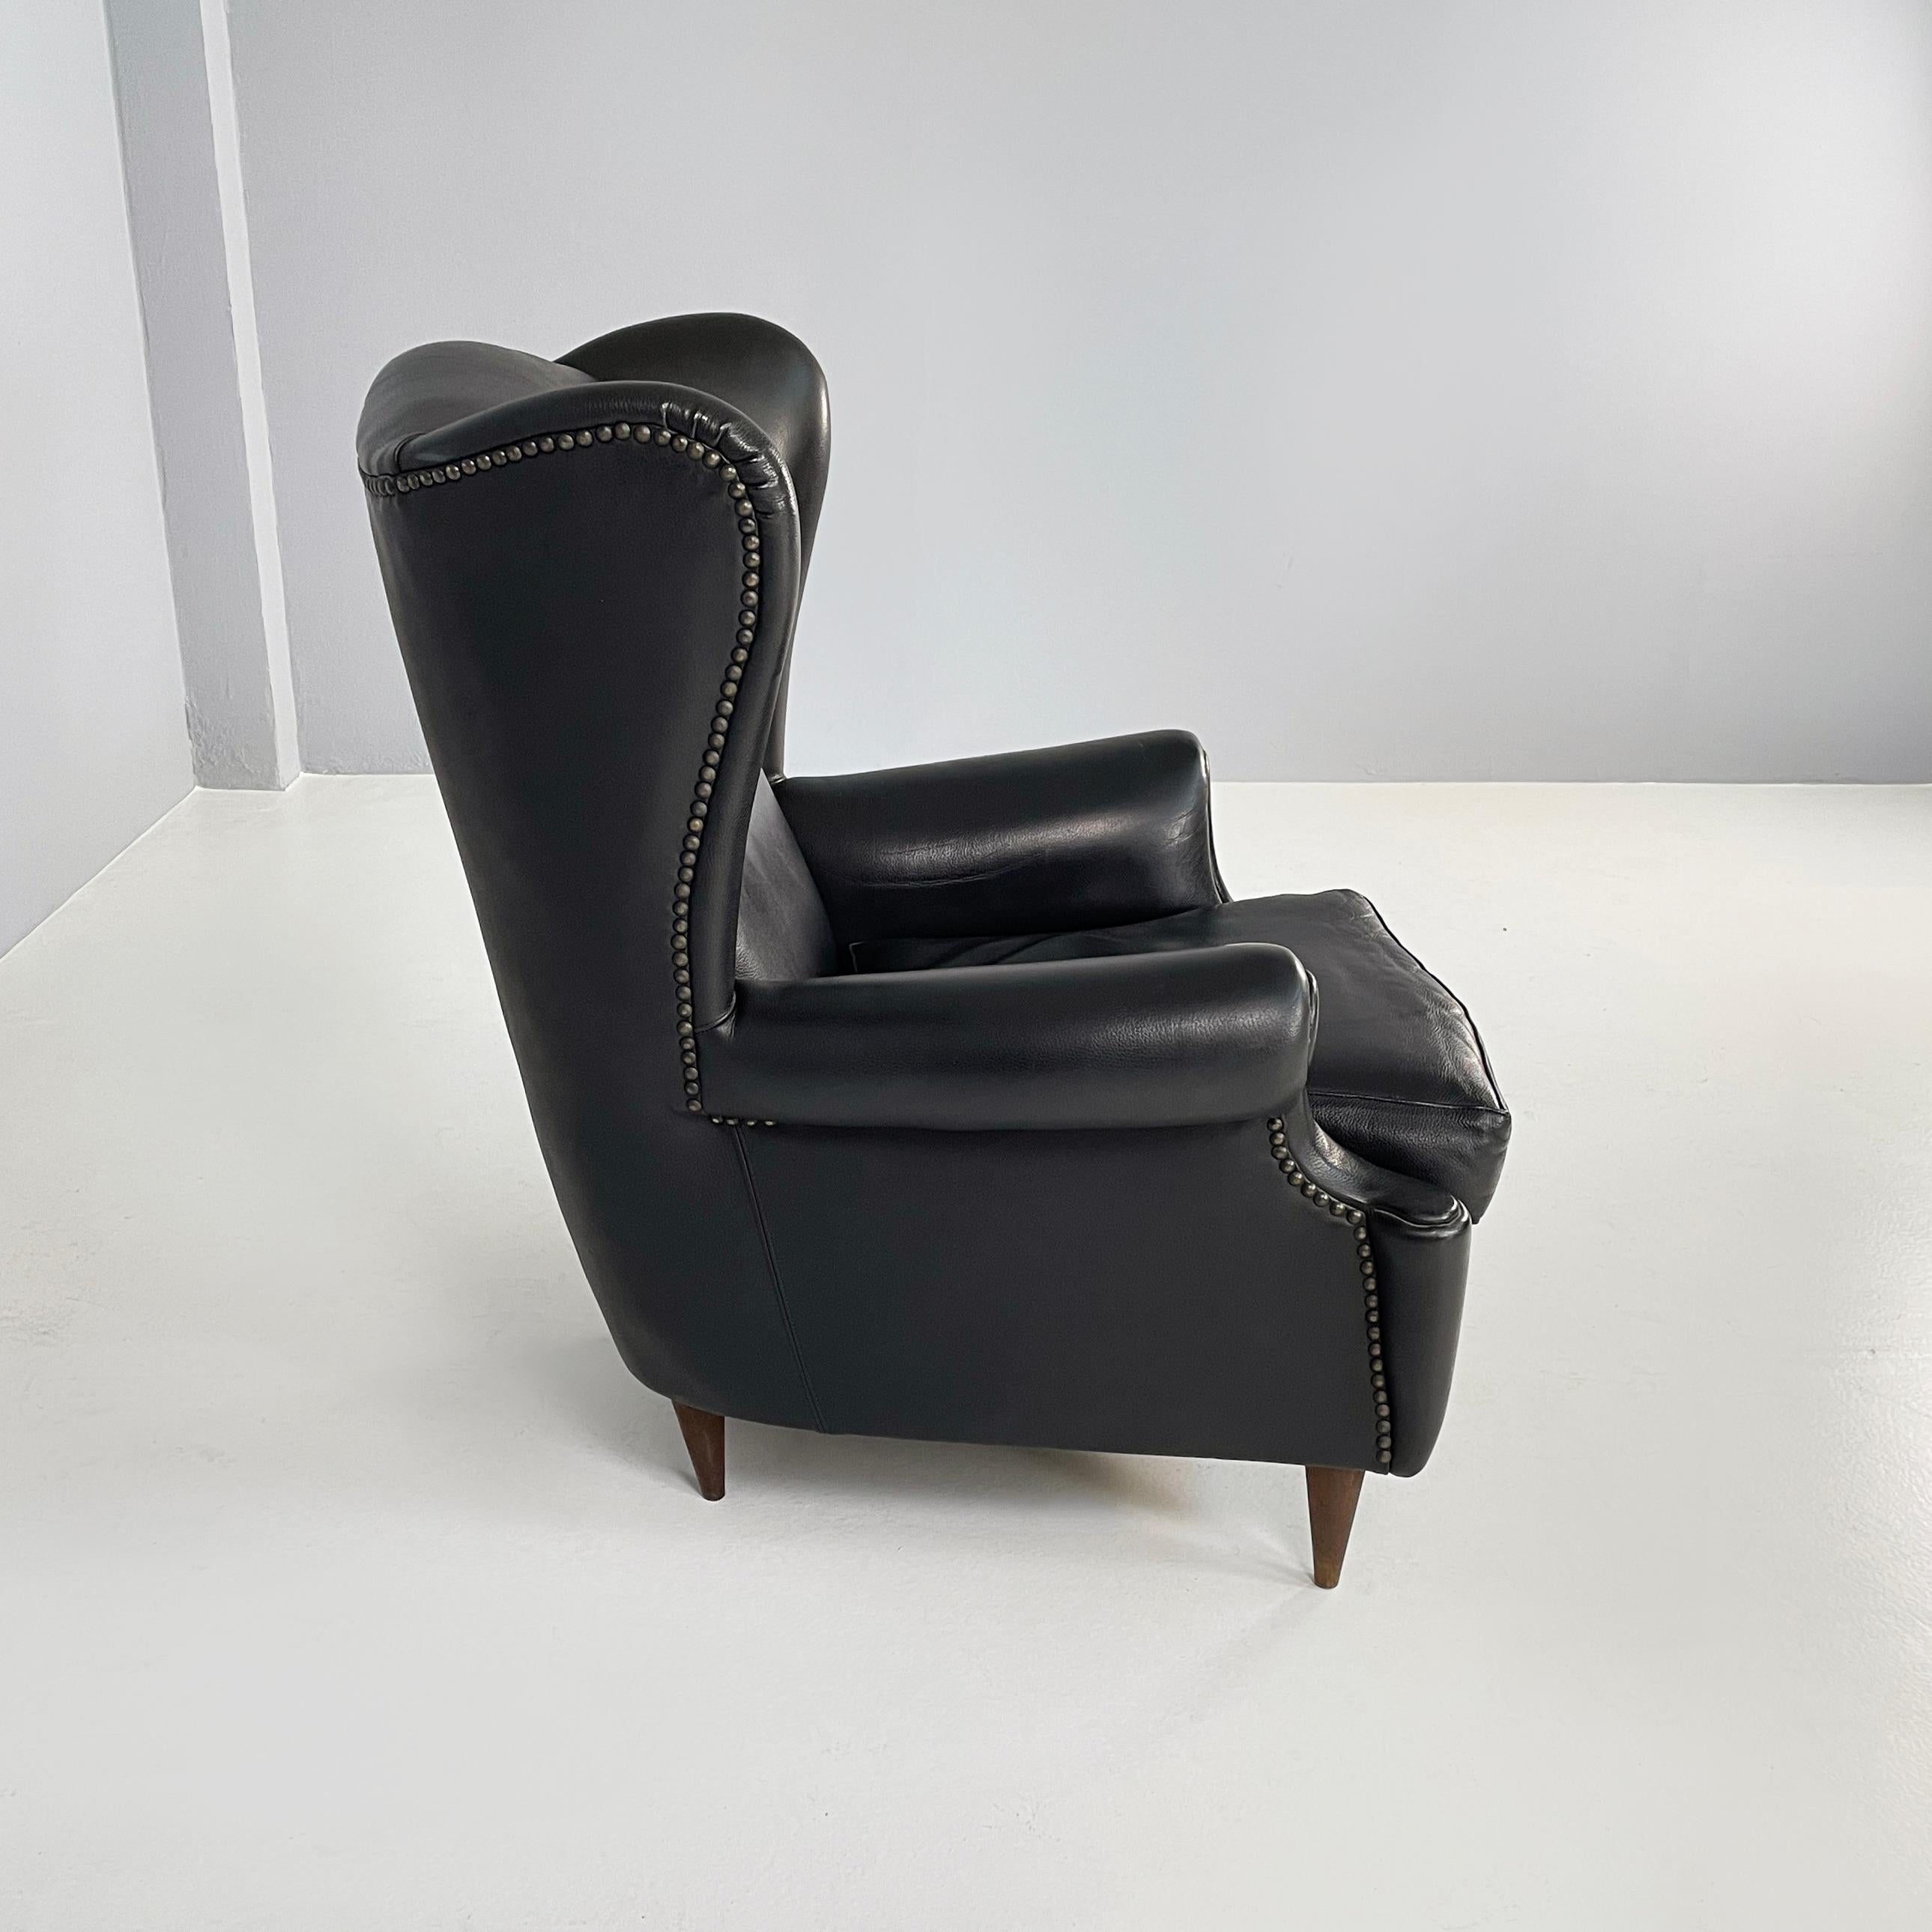 Mid-Century Modern Italian modern Bergere Armchair in black leather and wood, 1970s For Sale